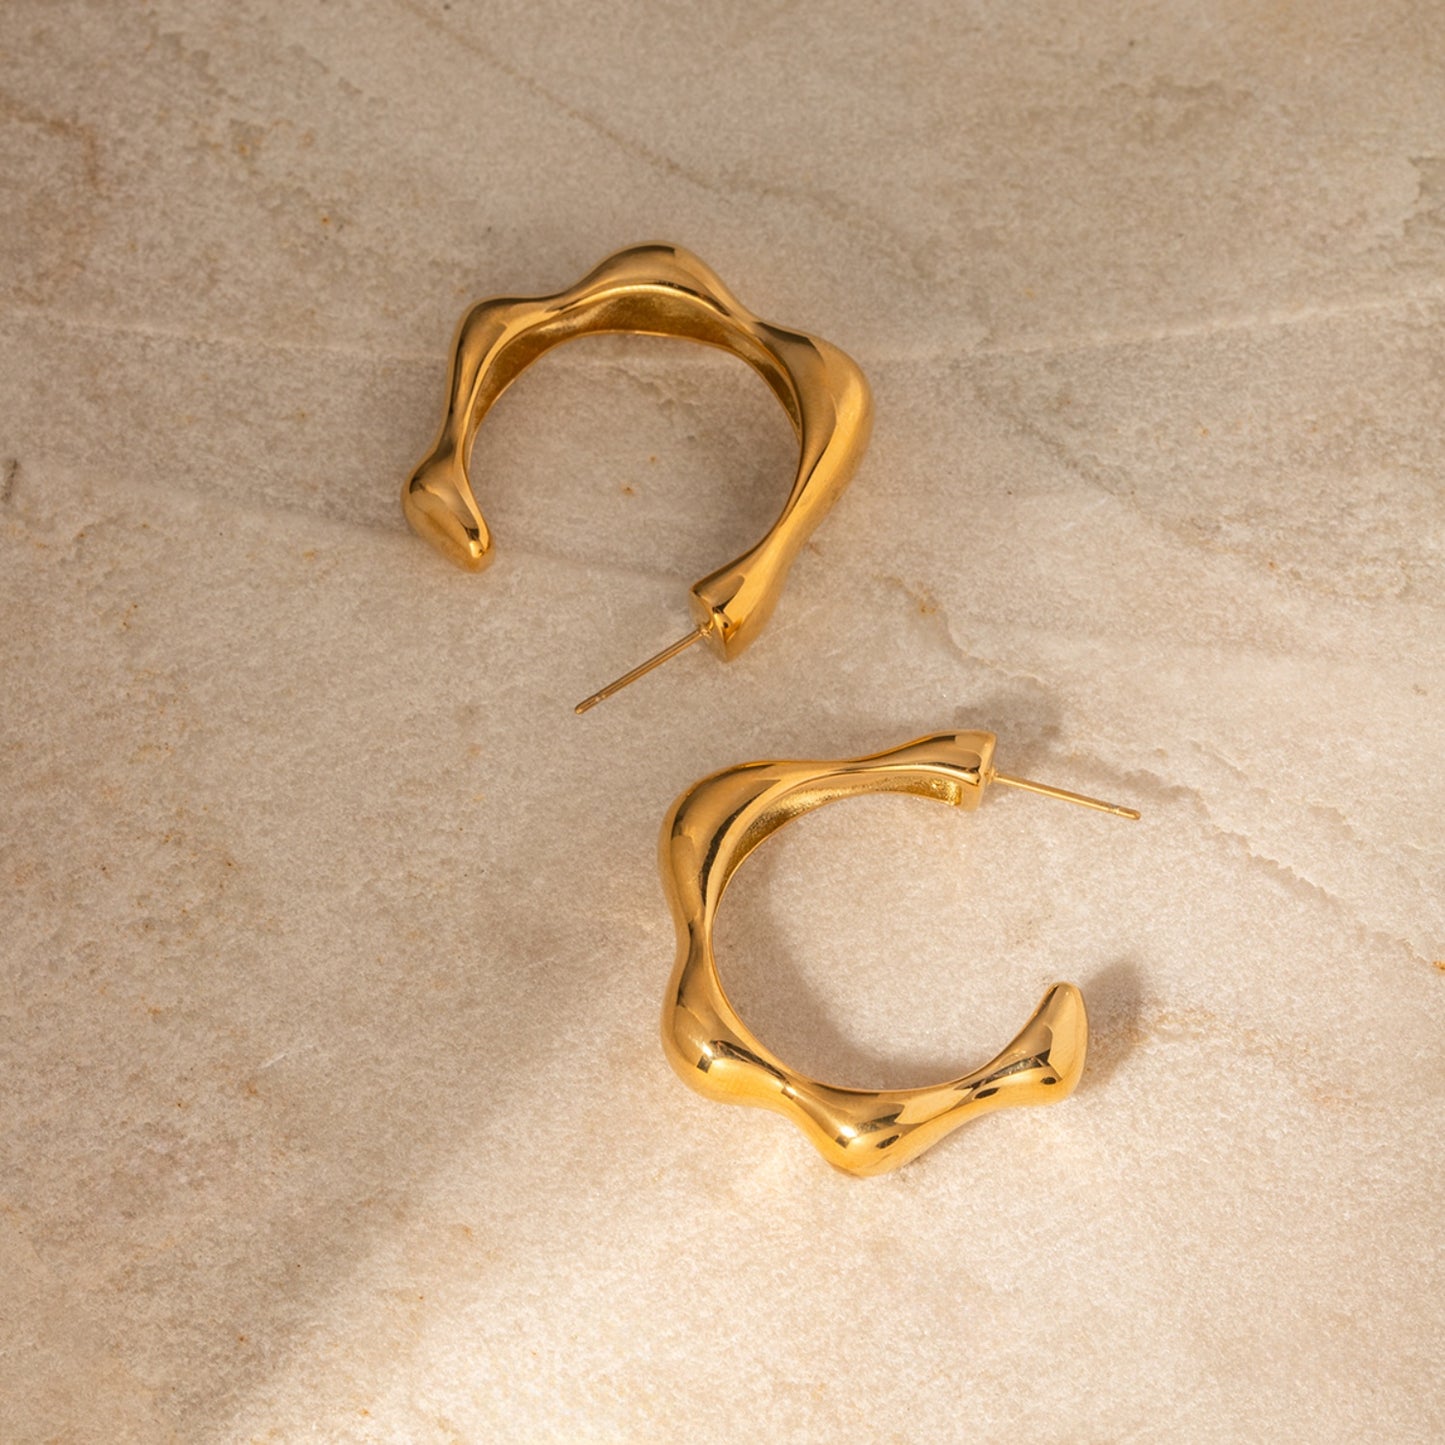 A pair of abstract, wavy stainless steel C-hoop earrings from Marianela's Exclusive Shop, LLC laid out on a warm-toned, textured stone surface. The earrings have a unique, fluid shape with a polished finish, showcasing an artistic and sophisticated design.